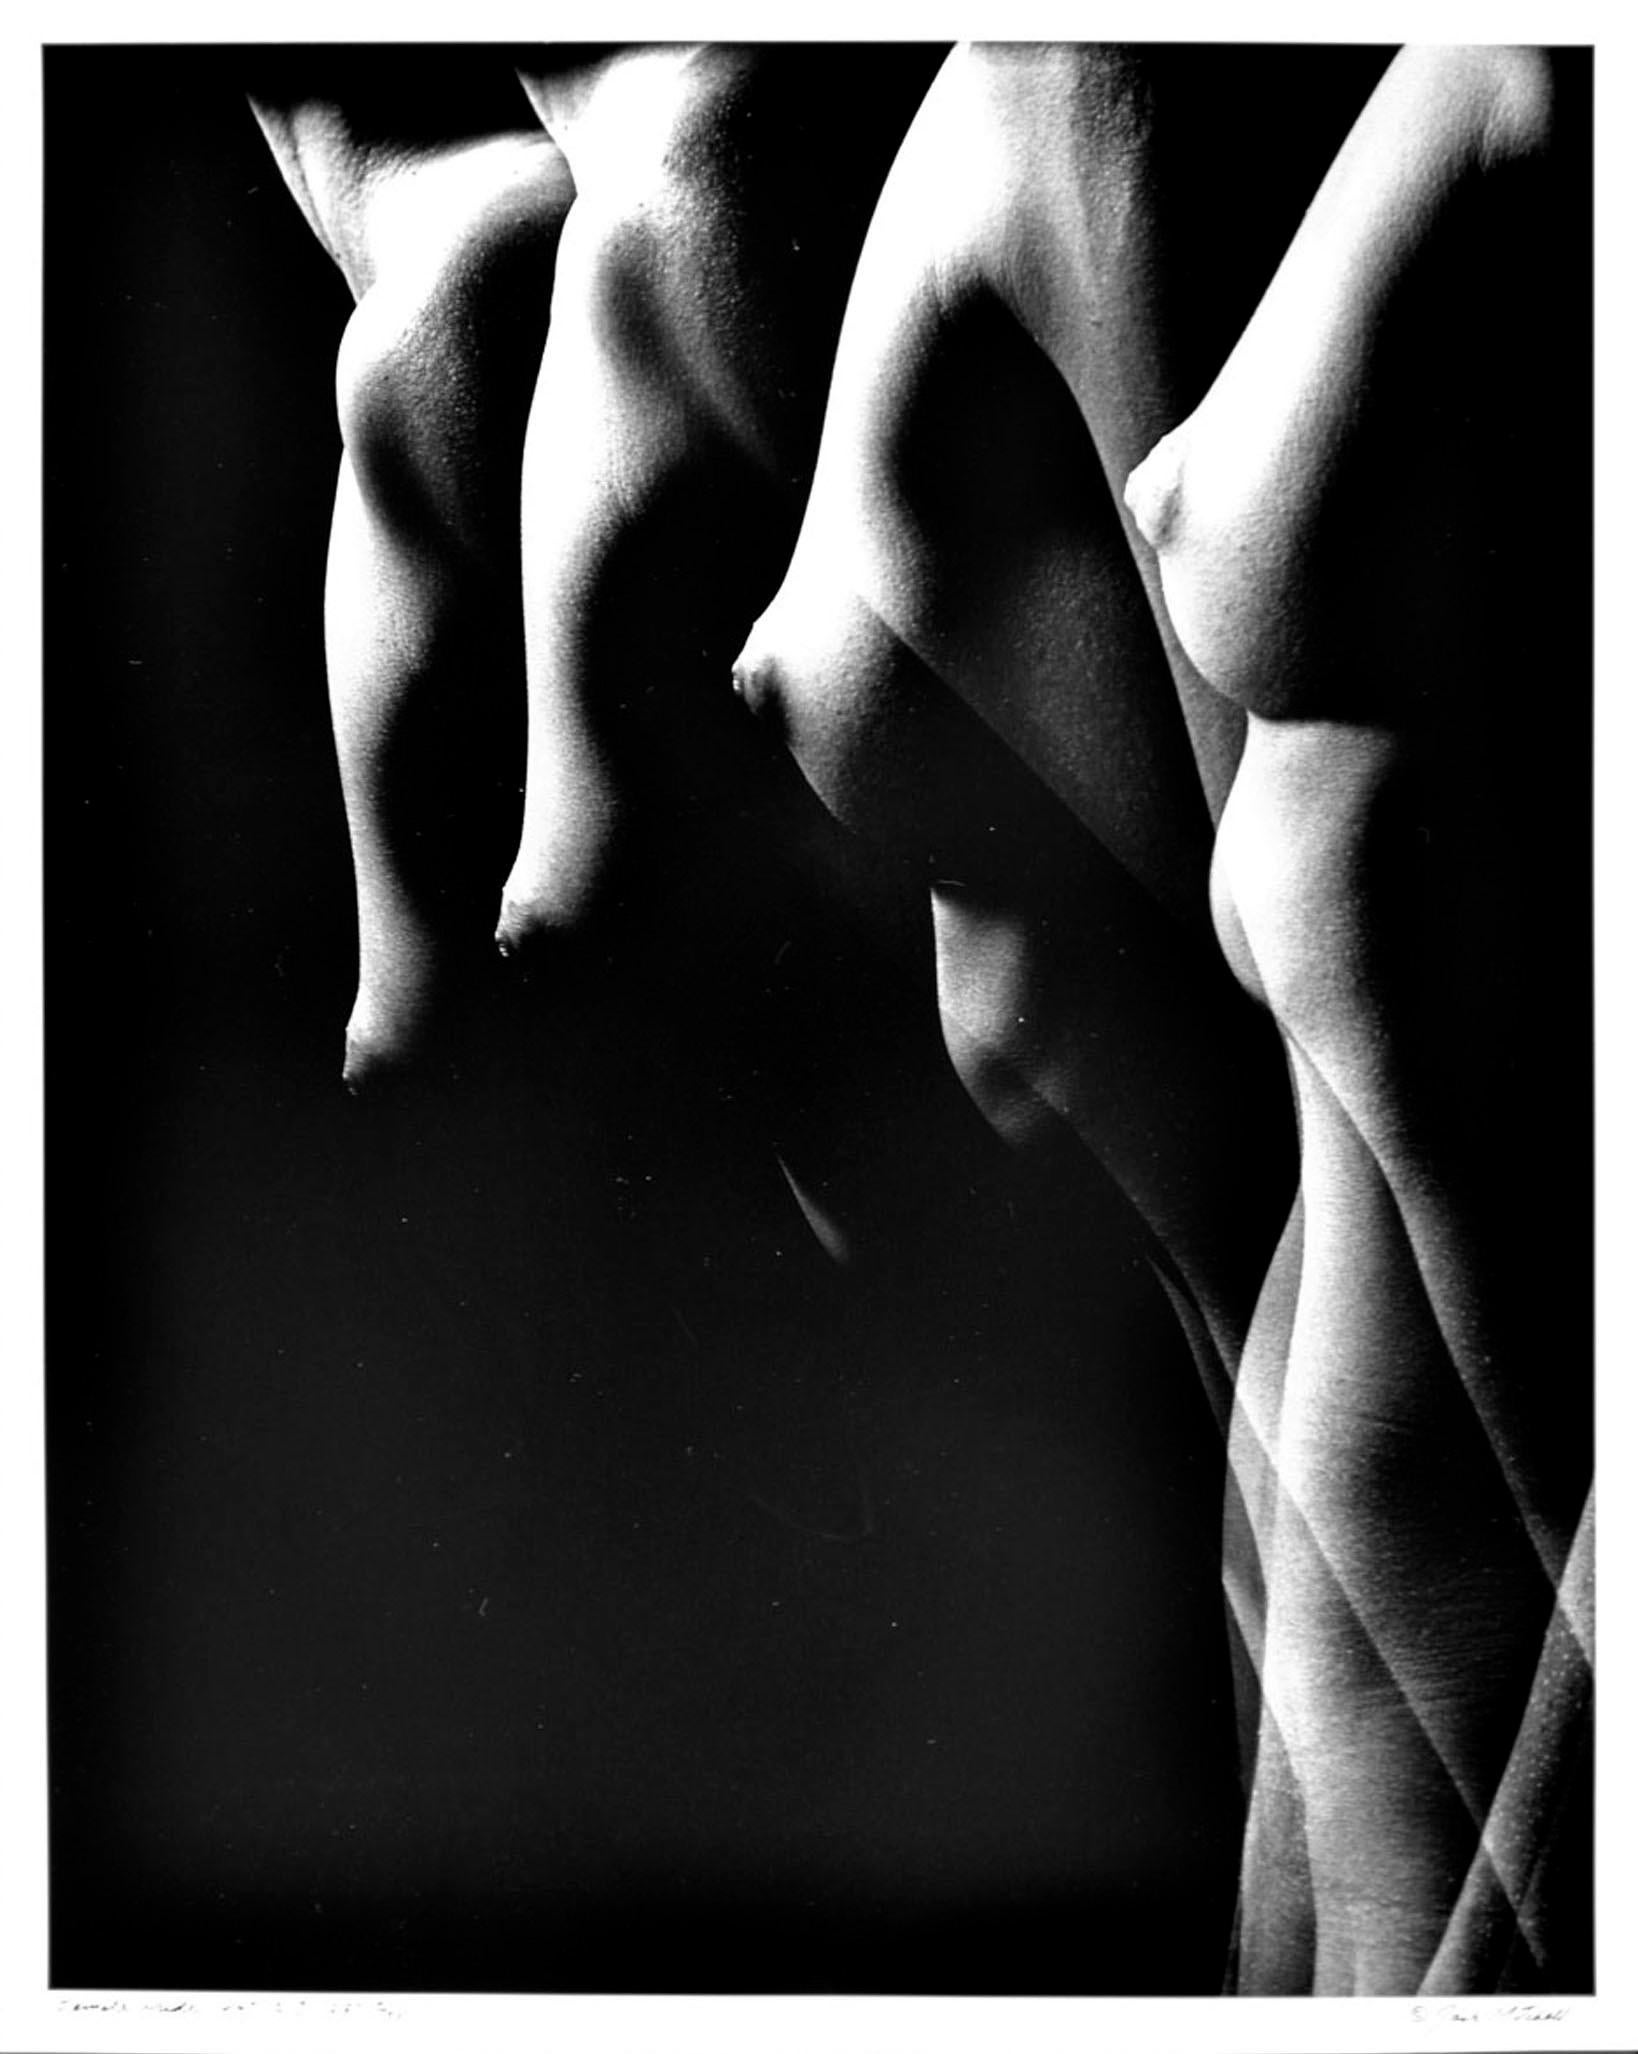 16 x 20" vintage silver gelatin photograph, multiple exposure female nude. Titled, numbered, dated, and signed by Jack Mitchell on the recto. Comes directly from the Jack Mitchell Archives with a certificate of authenticity.

Jack Mitchell's